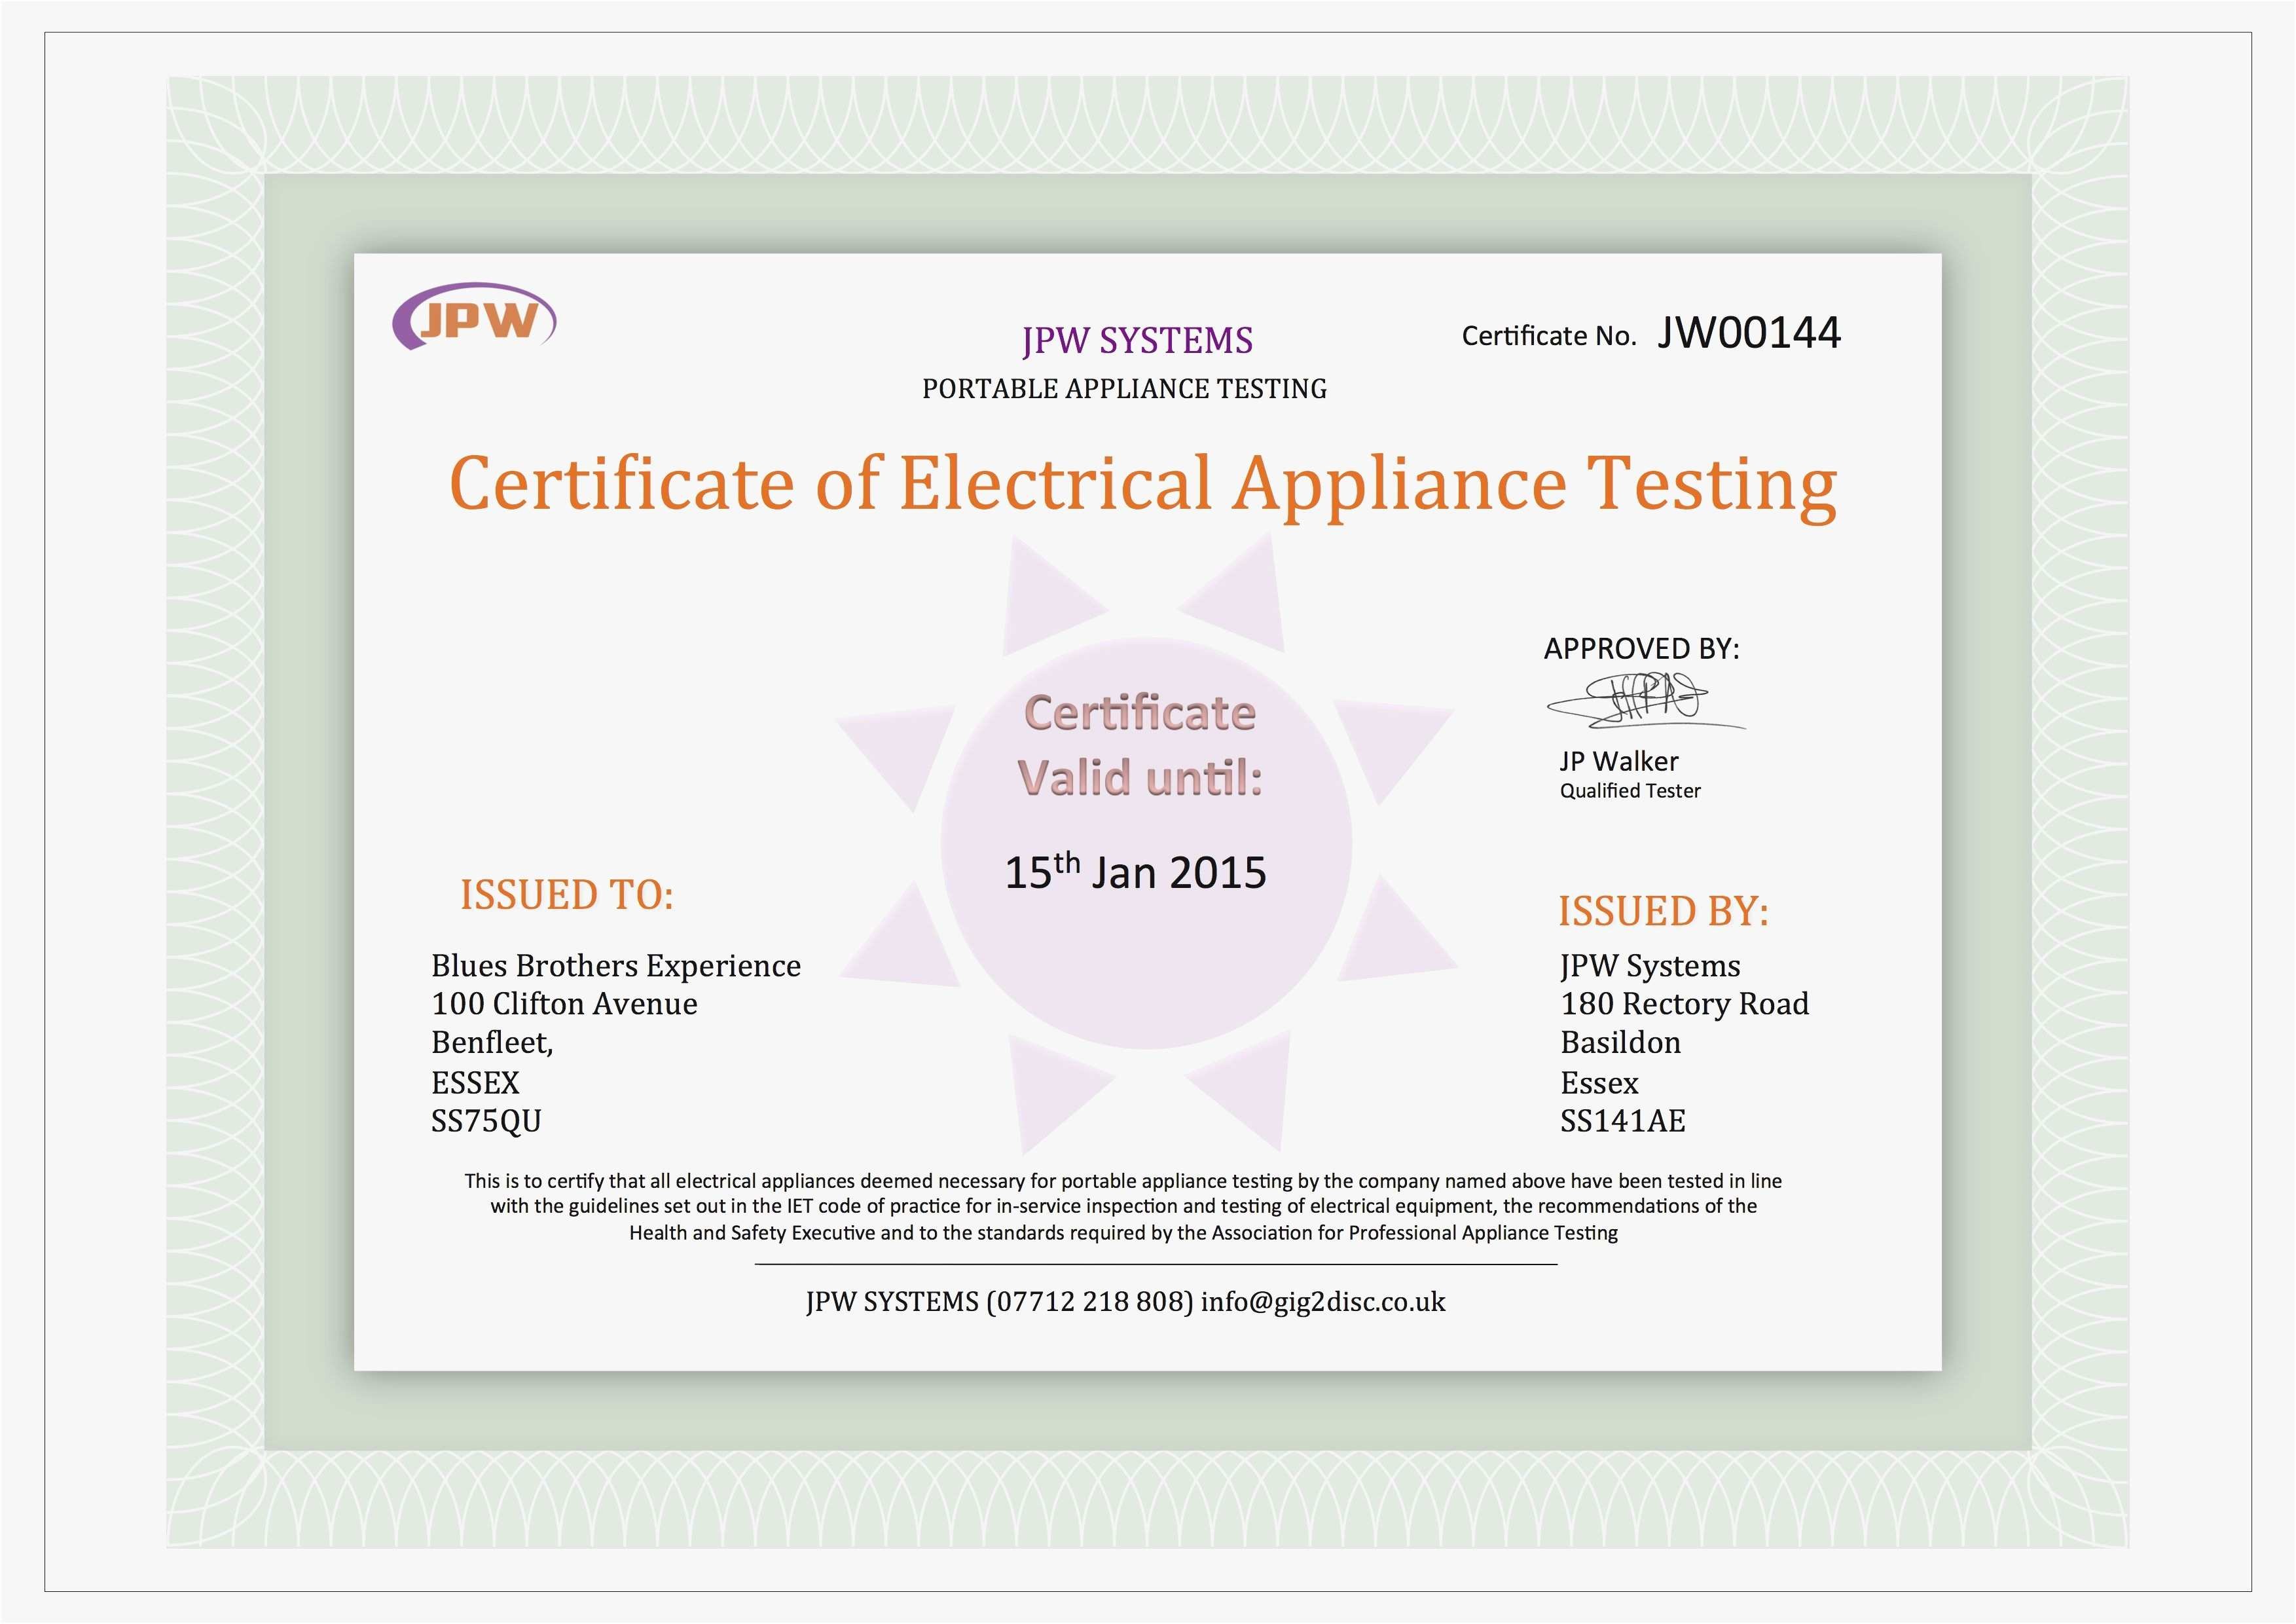 New Pat Testing Certificate And The Del Sharrons Test Portable Appliance